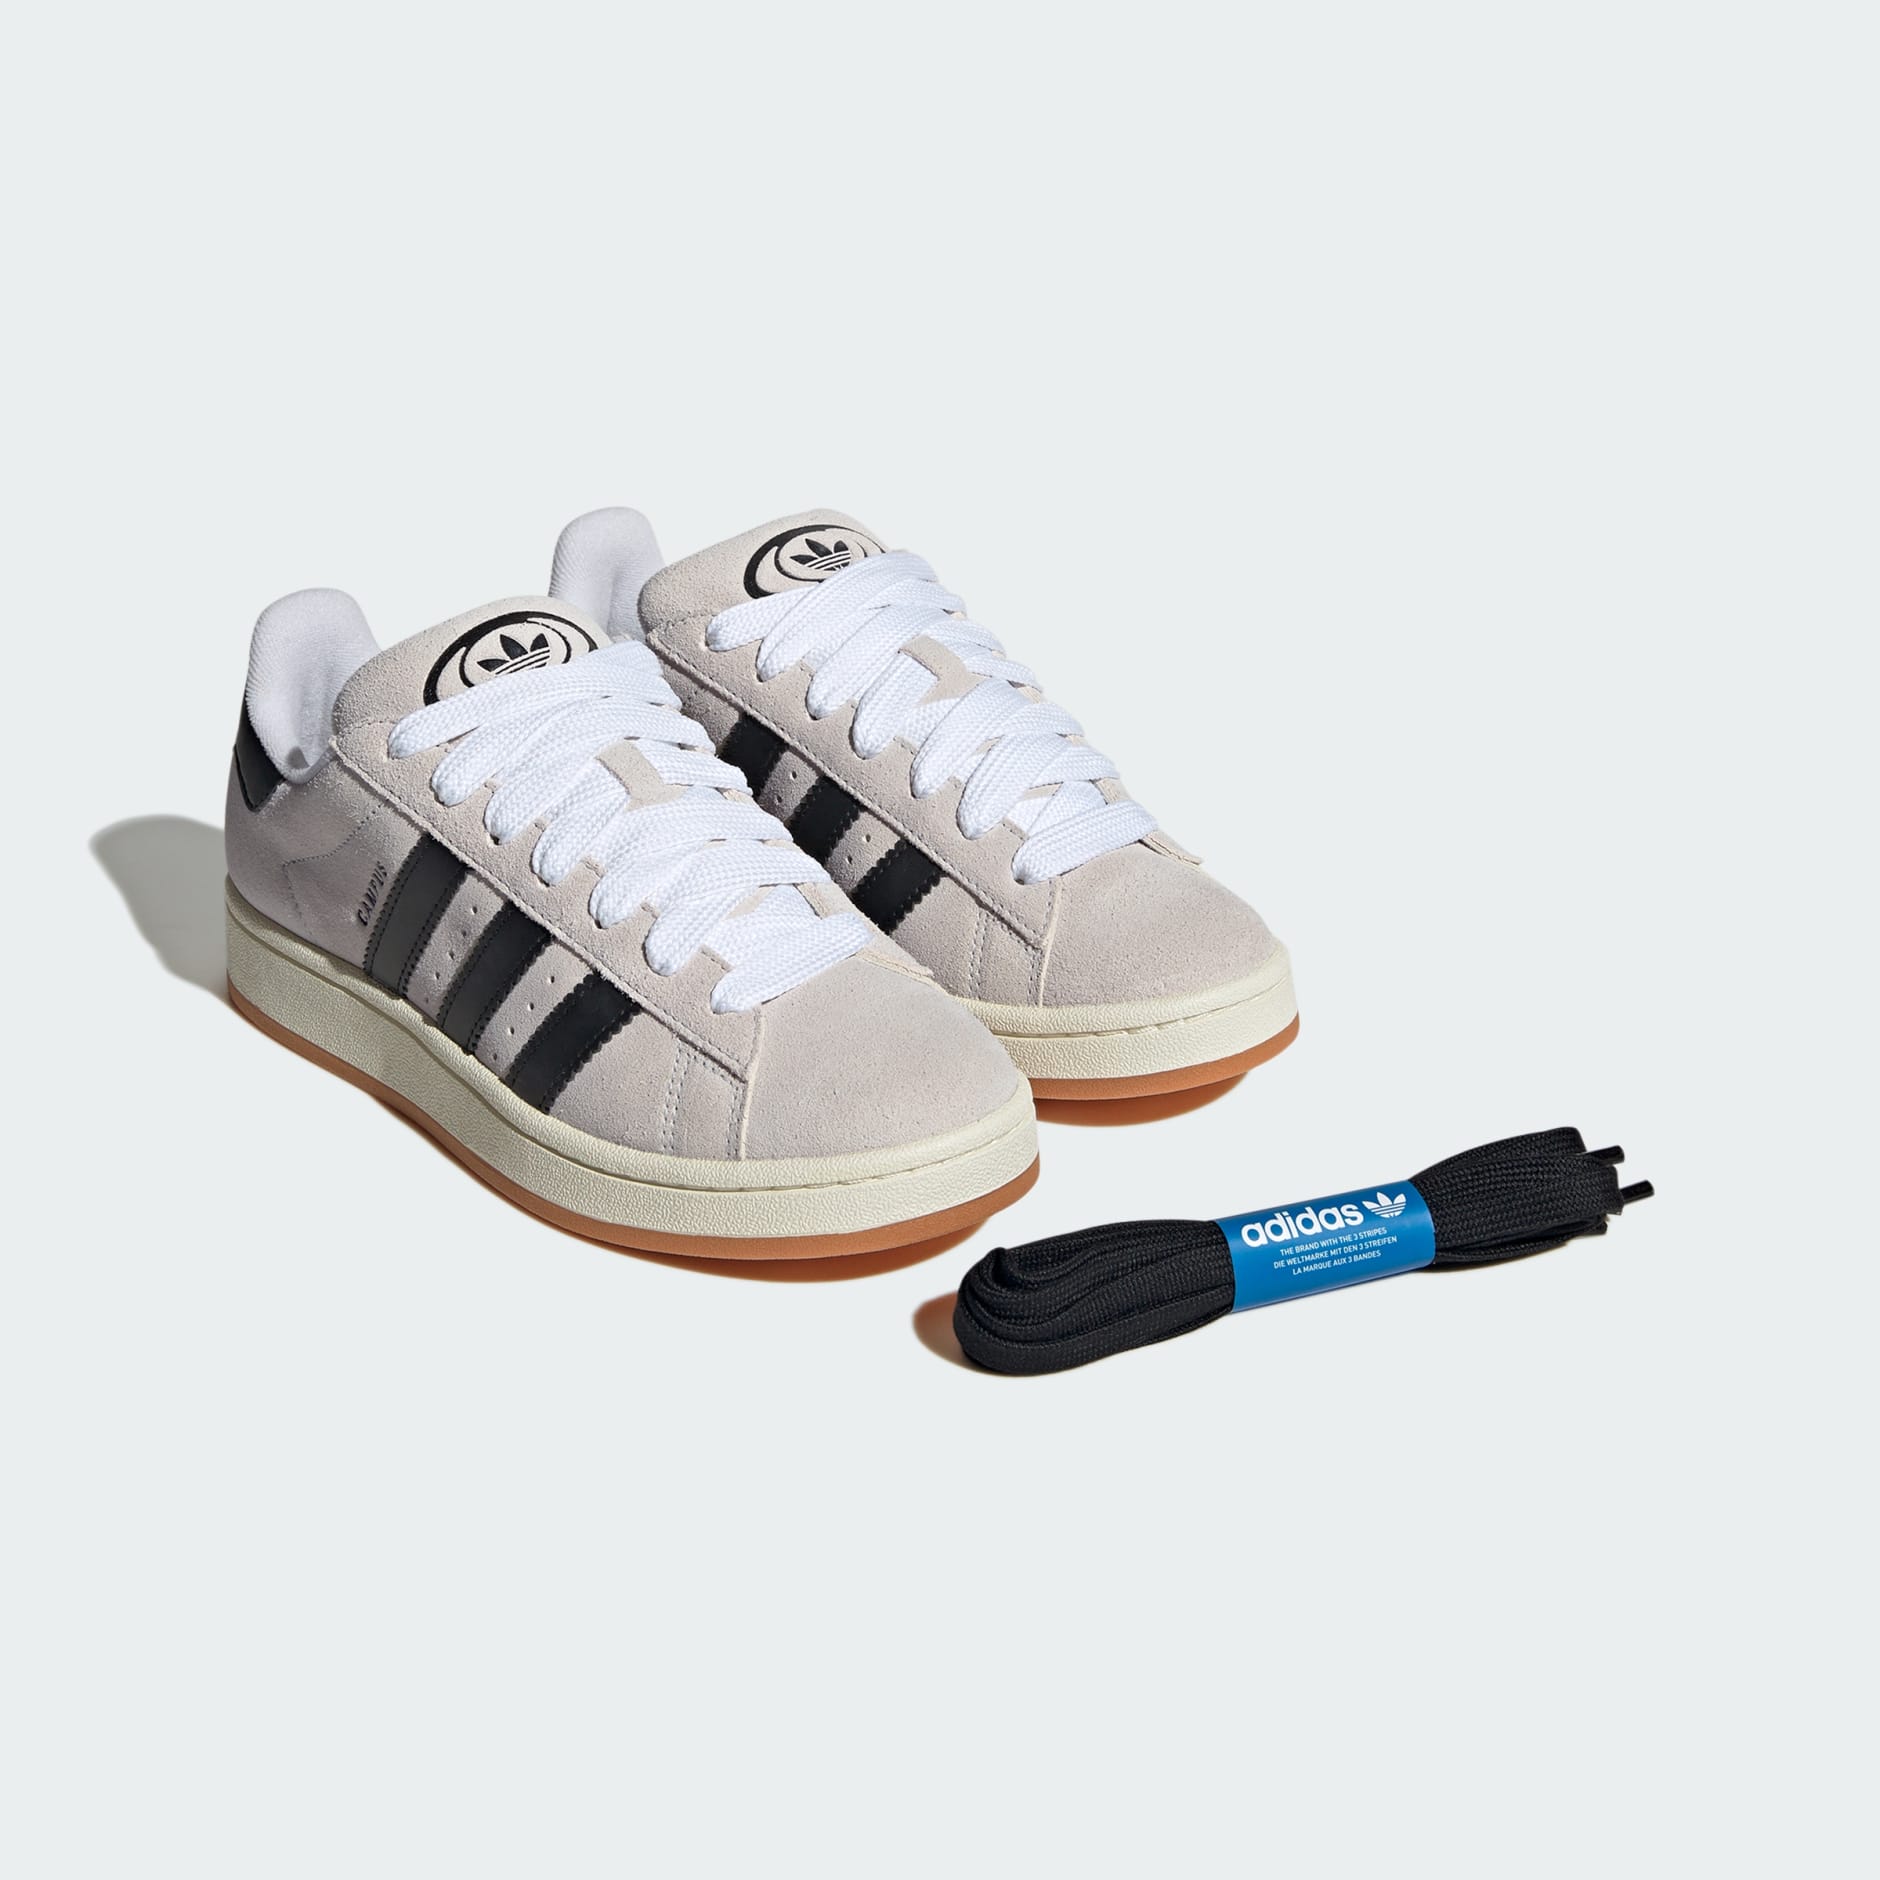 Women's Shoes - Campus 00s Shoes - White | adidas Oman